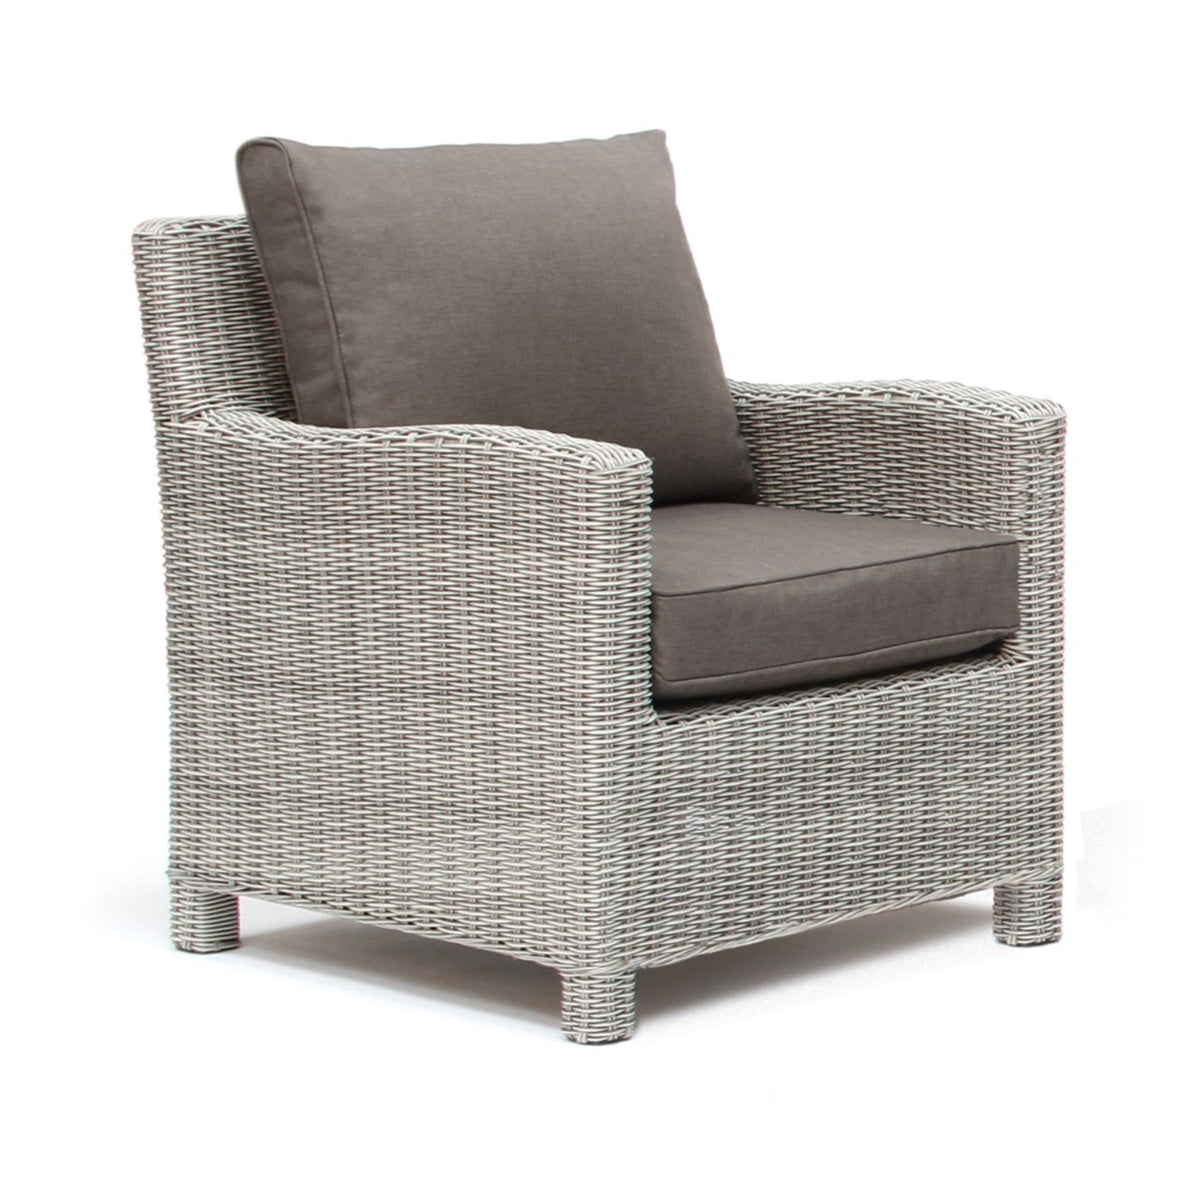 Kettler Palma Signature White Wash Wicker Casual Dining Armchair